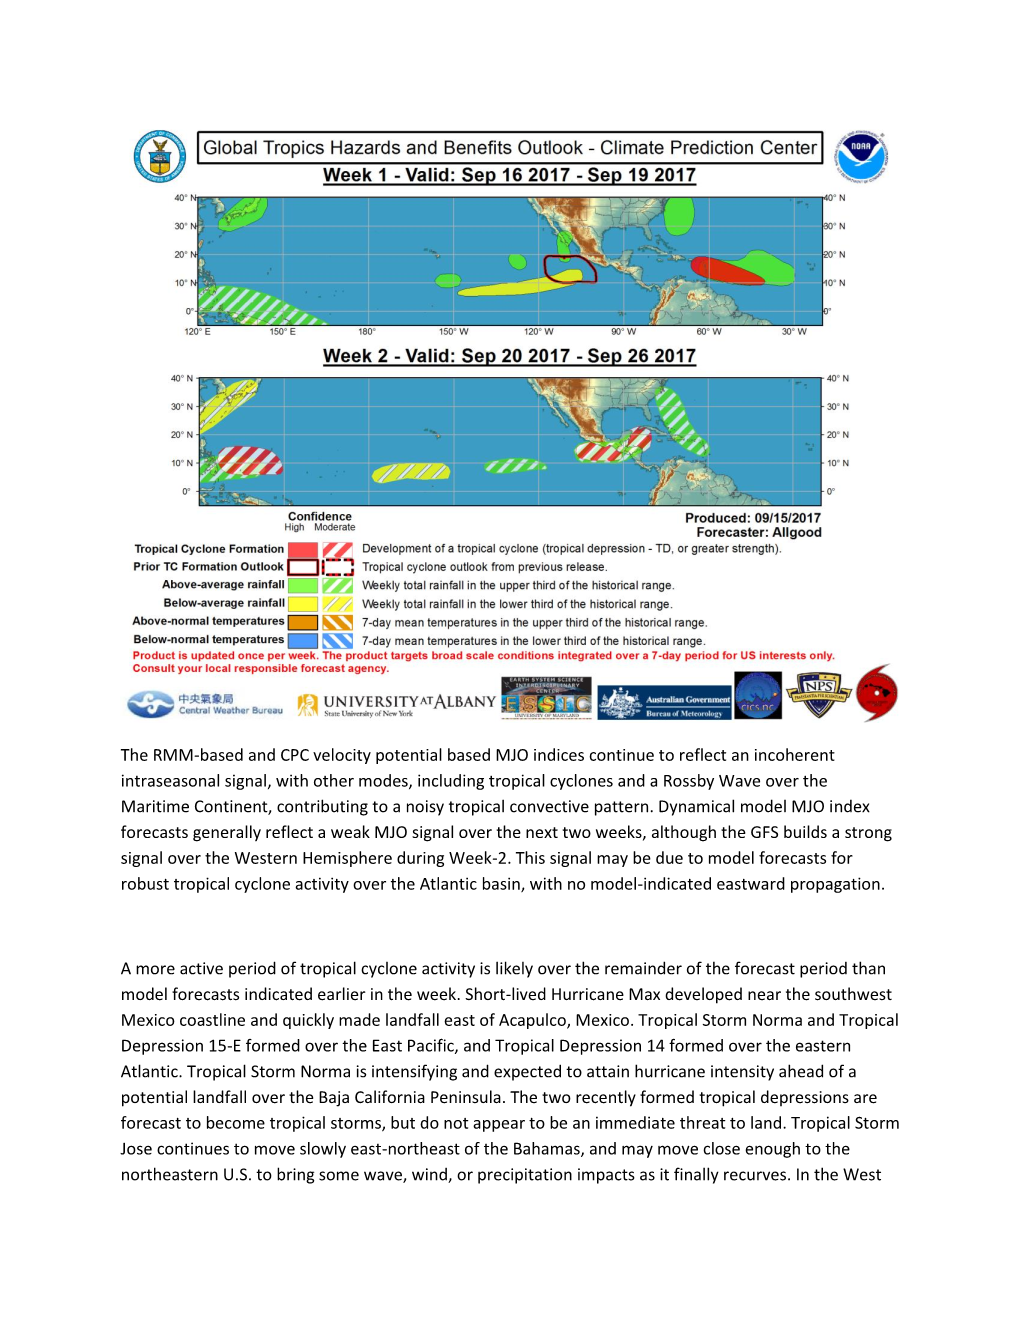 The RMM-Based and CPC Velocity Potential Based MJO Indices